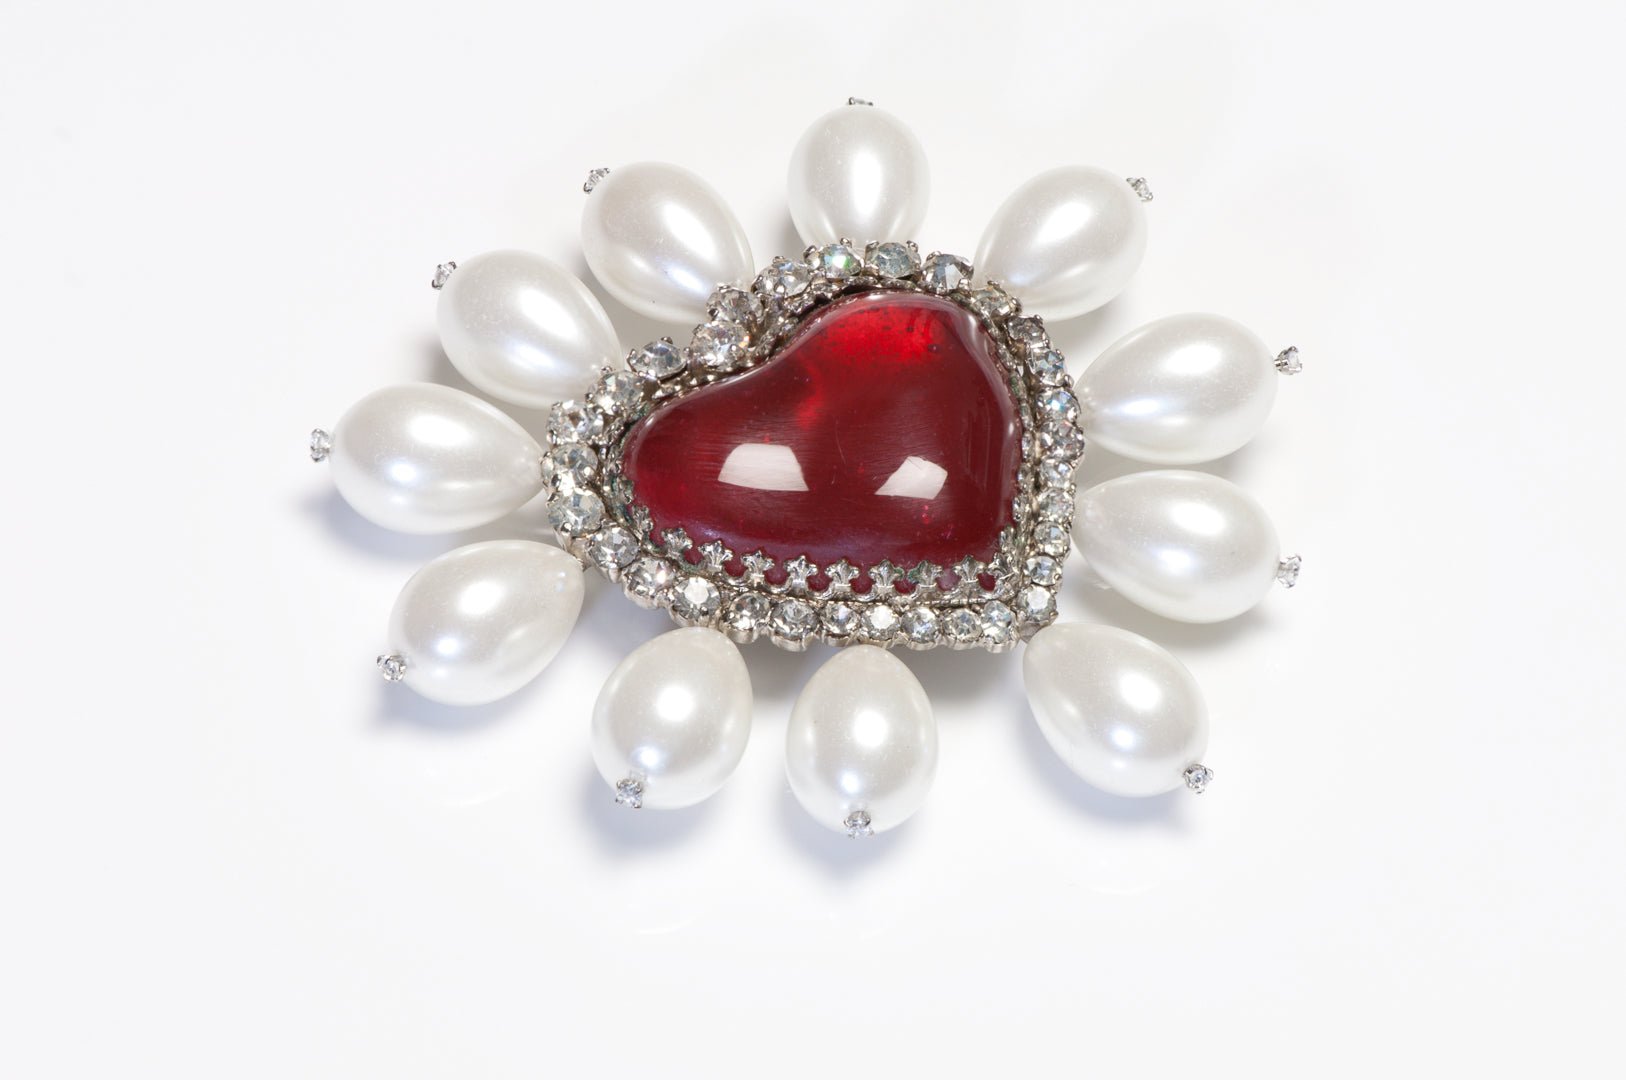 Christian Dior Paris Couture 1950’s Maison Gripoix Red Glass Pearl Heart Brooch